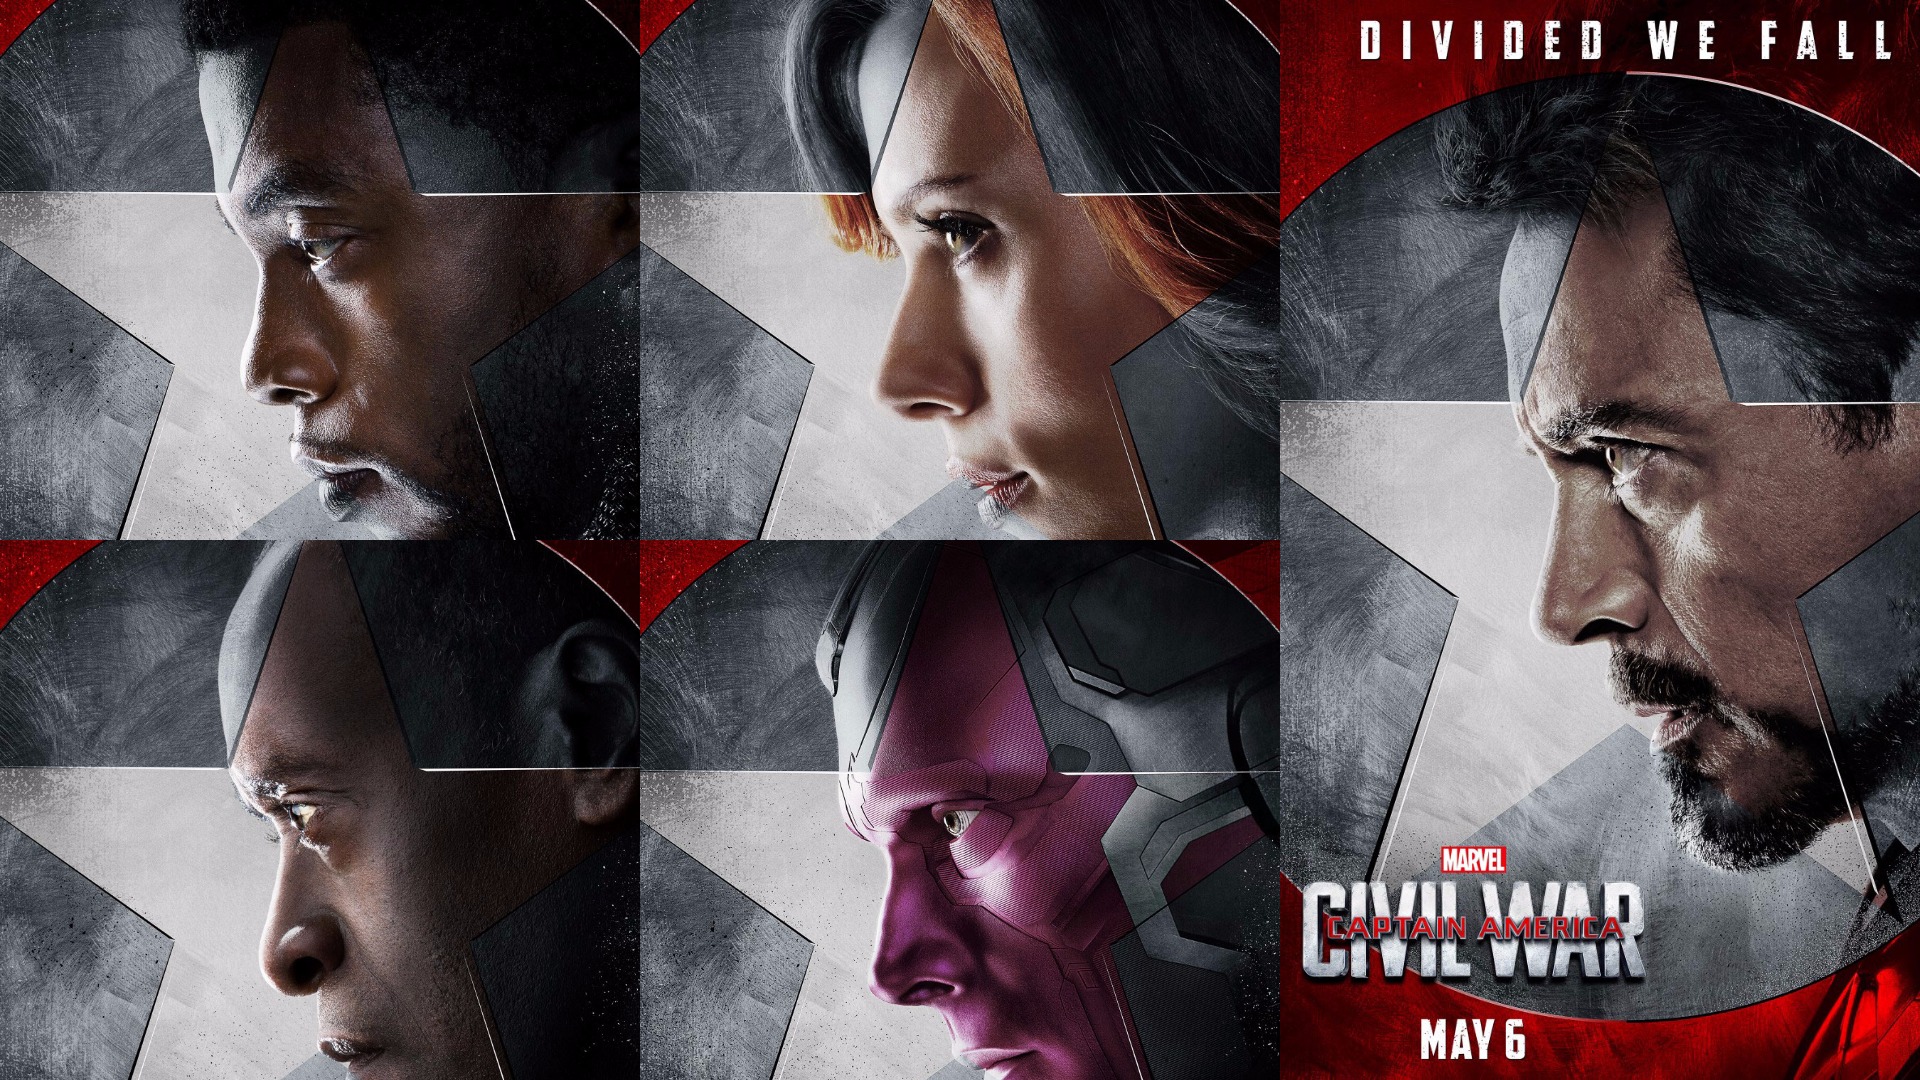 Character Posters for Team Iron Man